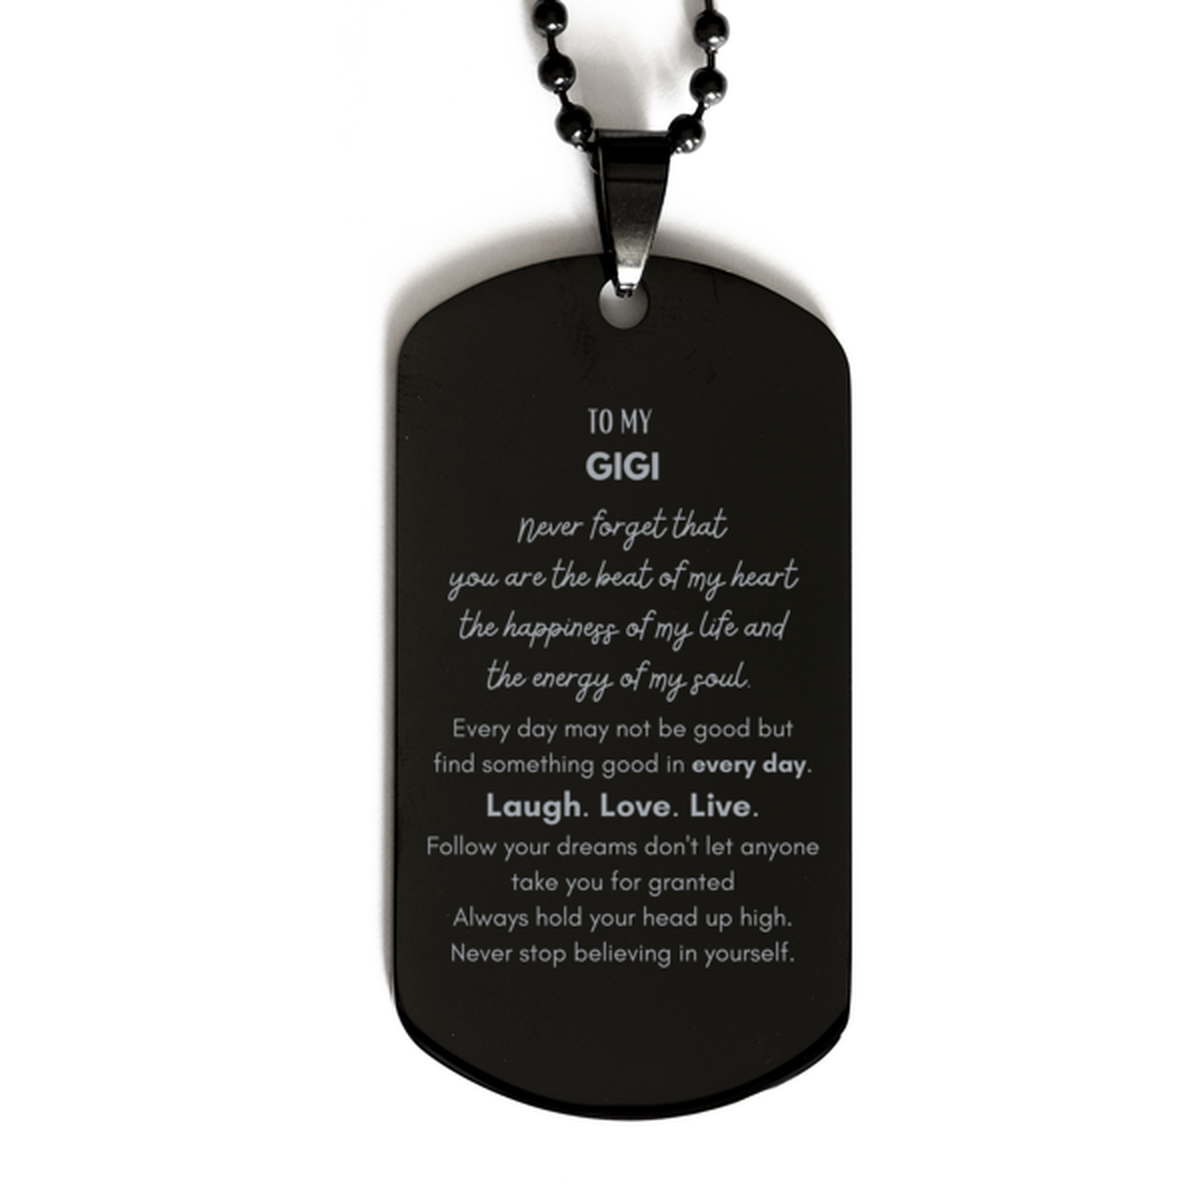 To My Gigi Dogtag Gifts, Christmas Gigi Black Dog Tag Present, Birthday Unique Motivational For Gigi, To My Gigi Never forget that you are the beat of my heart the happiness of my life and the energy of my soul